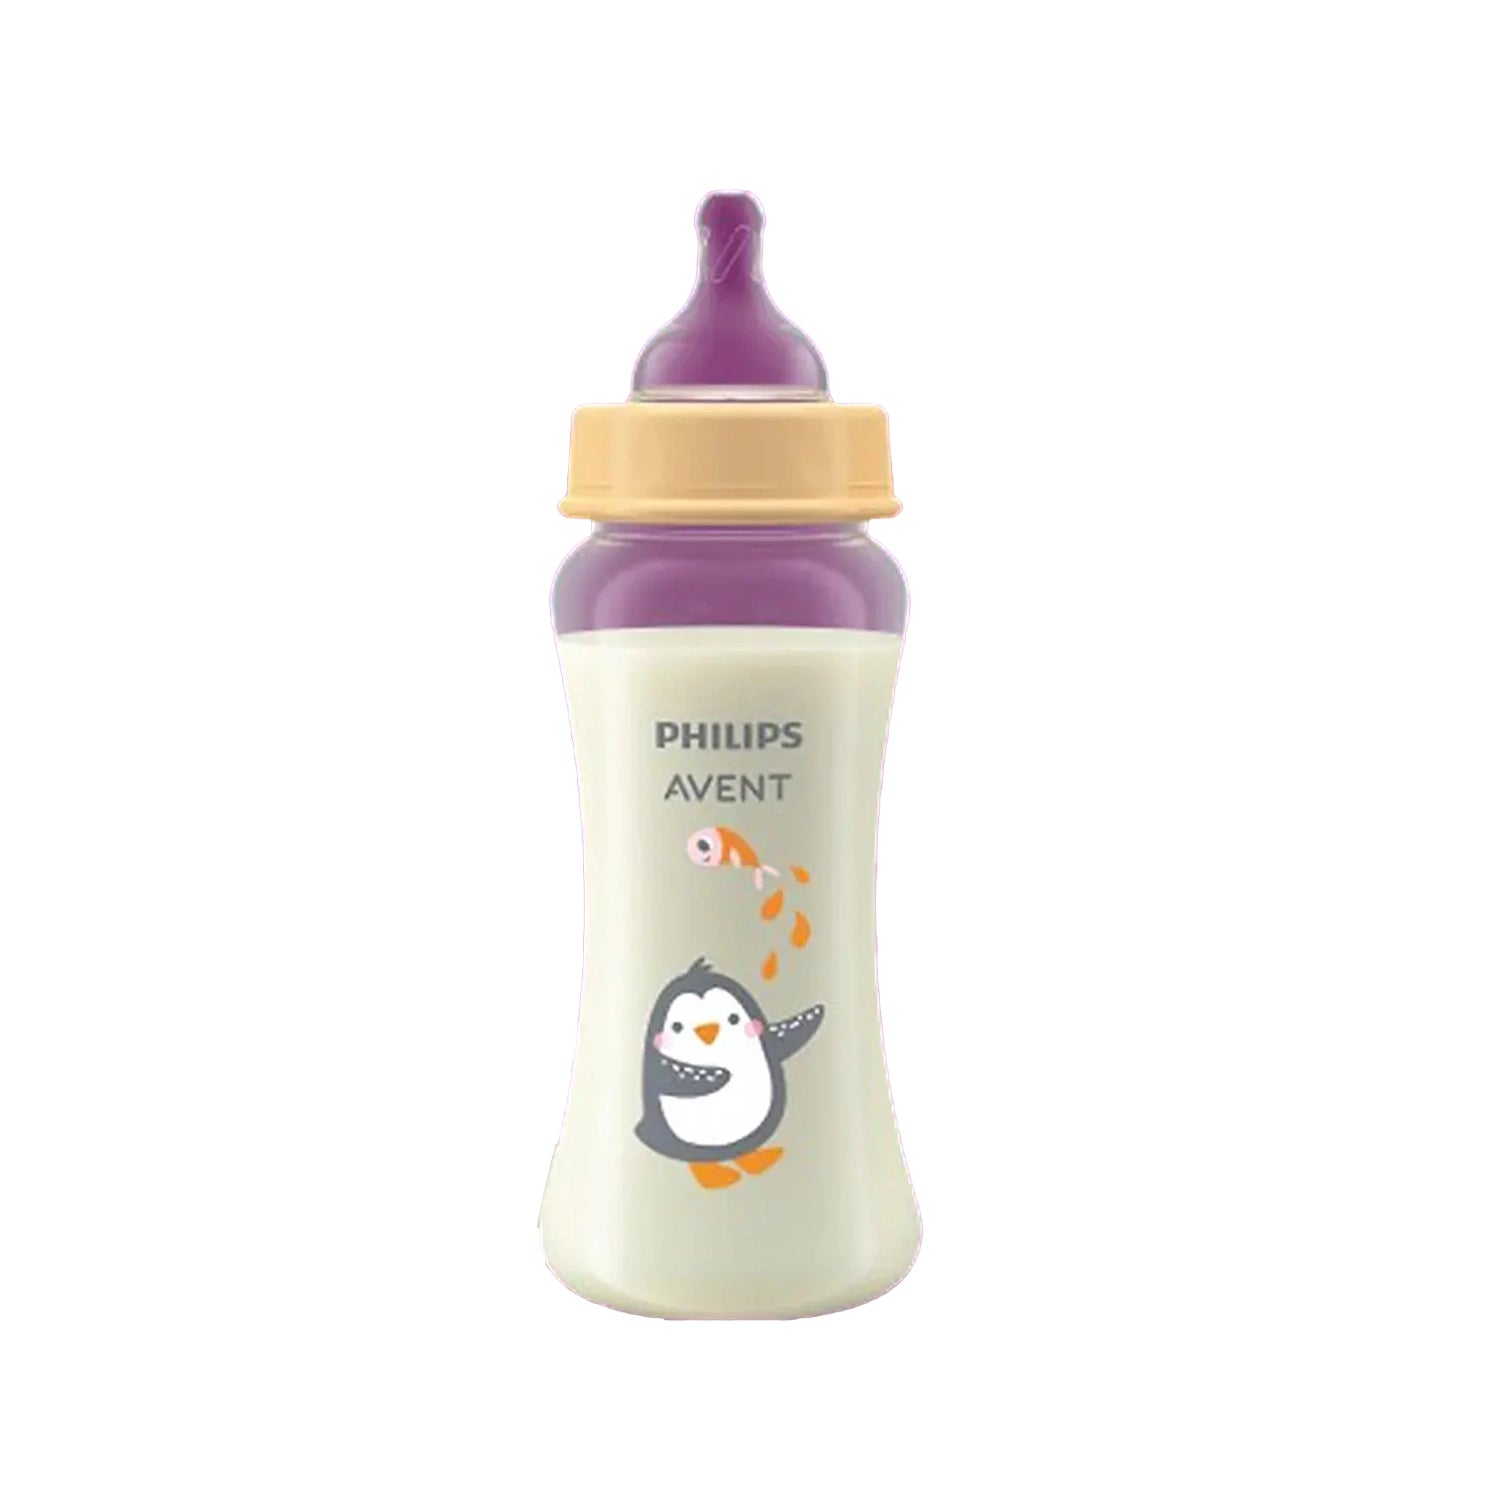 Buy Philips Avent Grow Baby Feeding Bottle - 330ml, 6+months Online in India at uyyaala.com